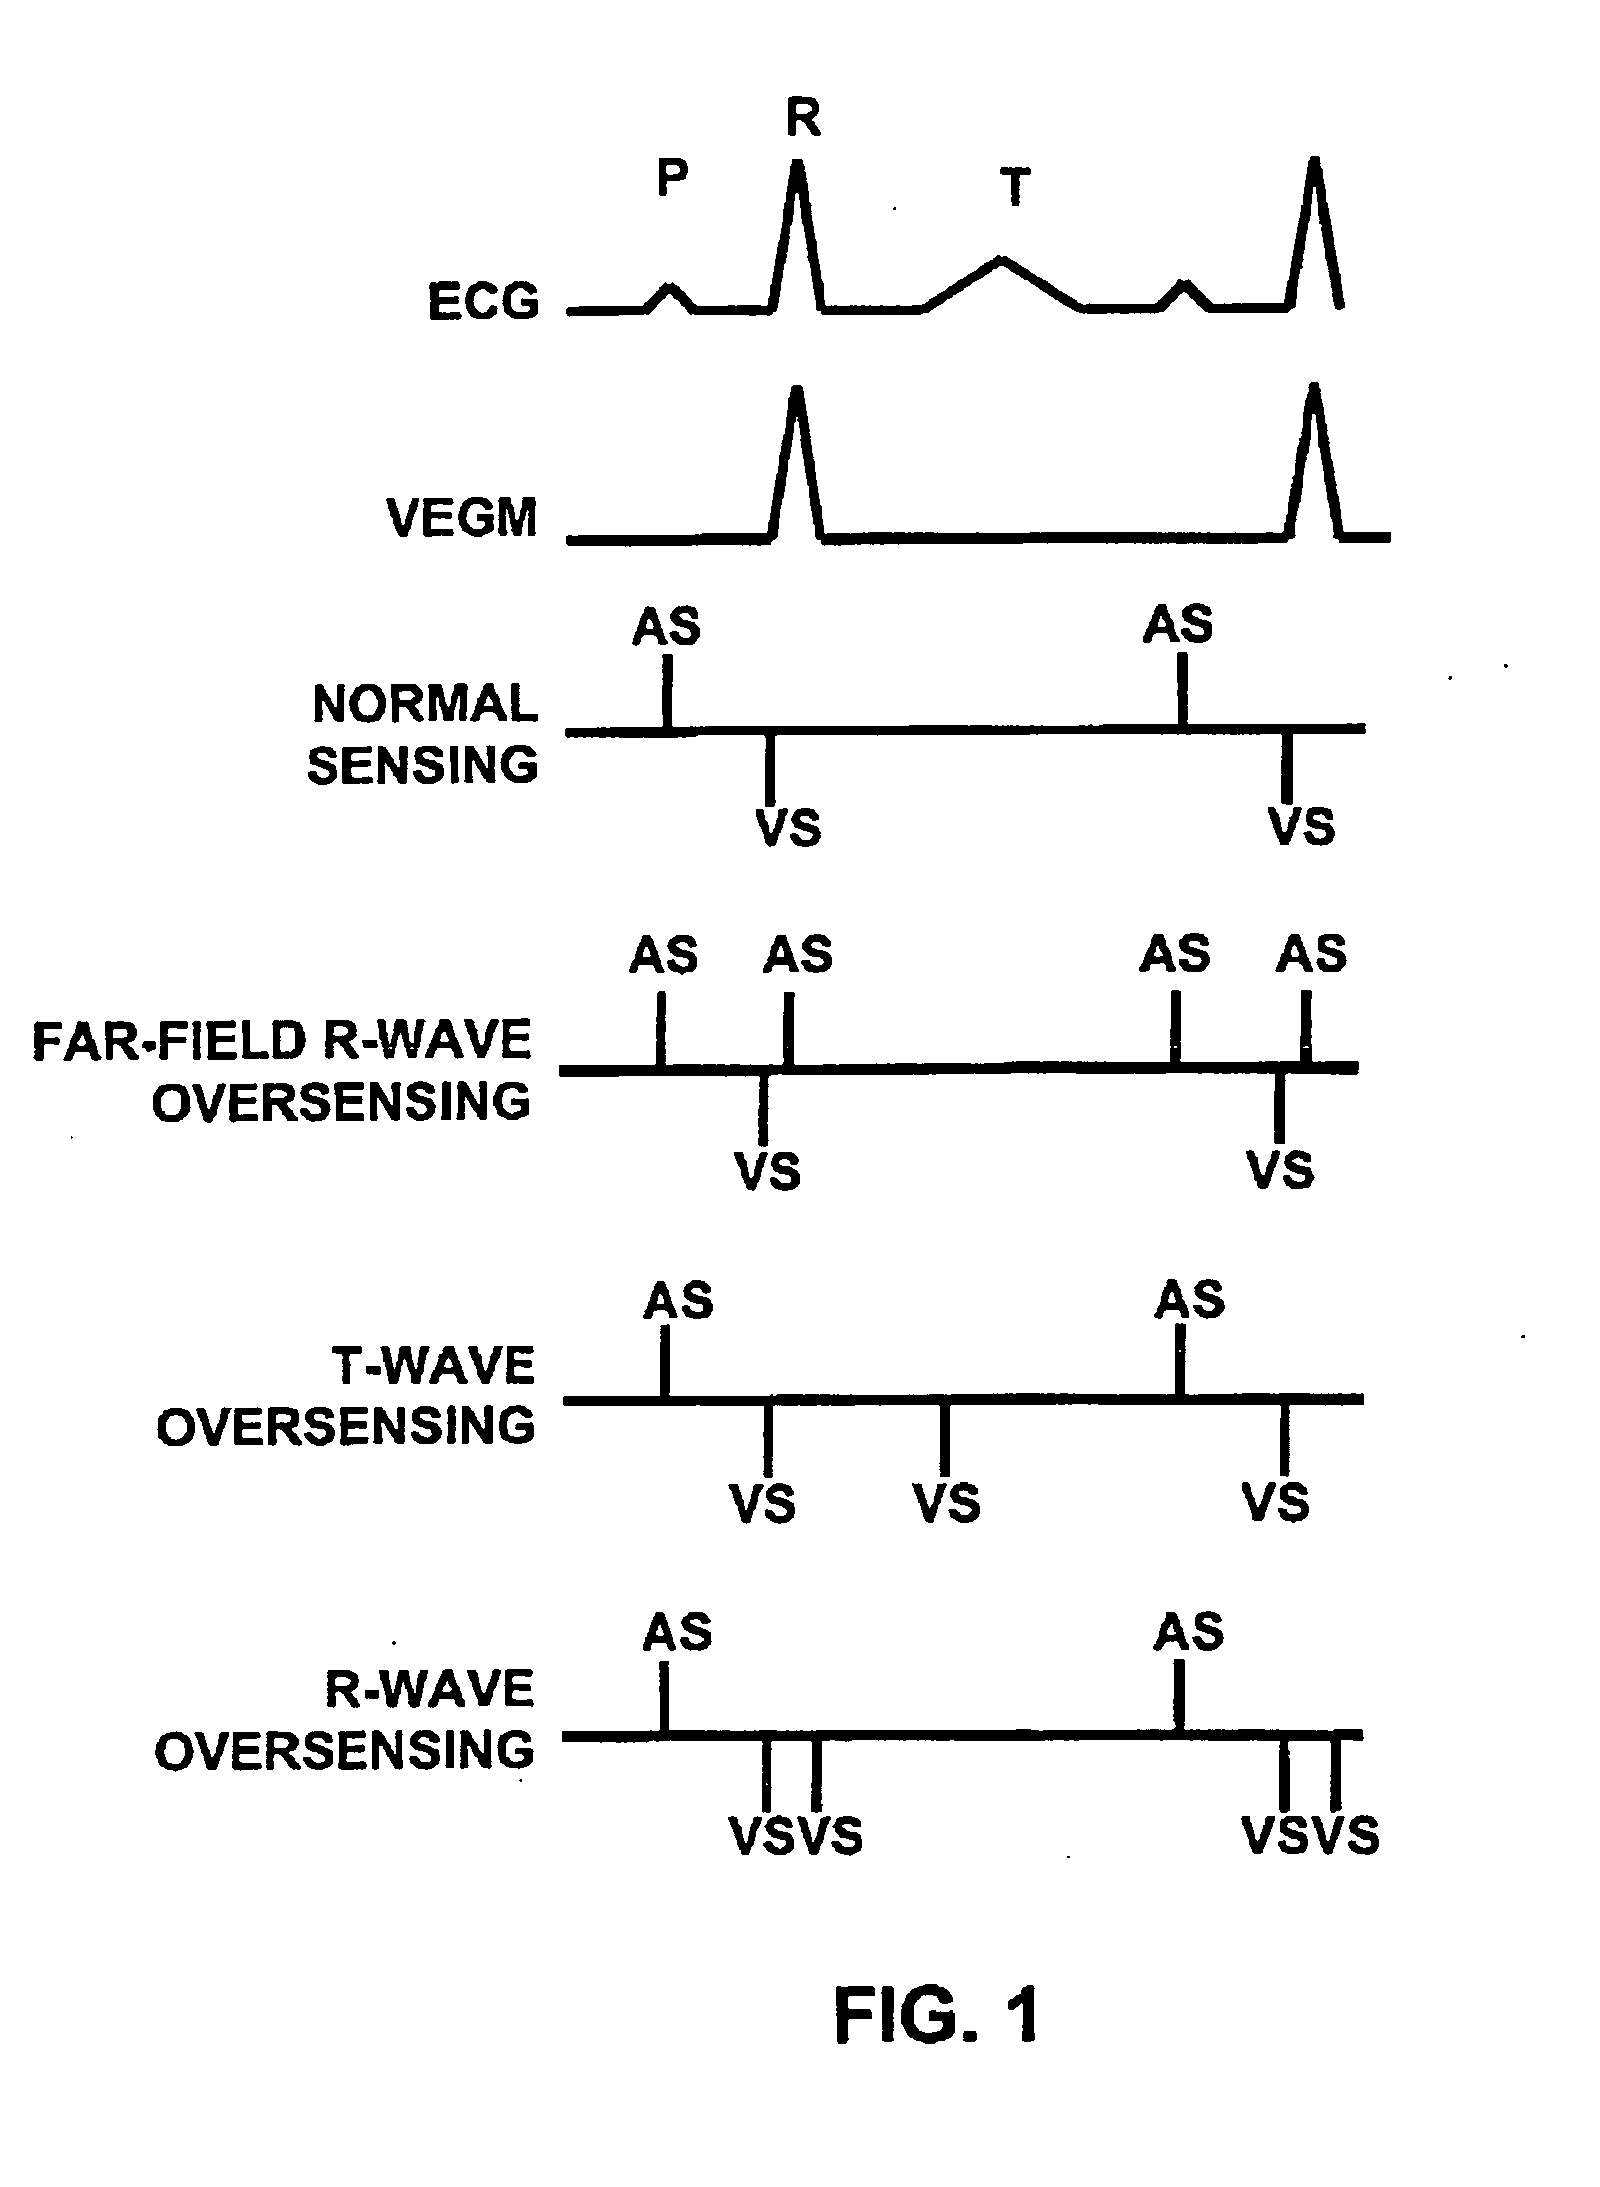 Method and apparatus for identifying oversensing using far-field intracardiac electrograms and marker channels